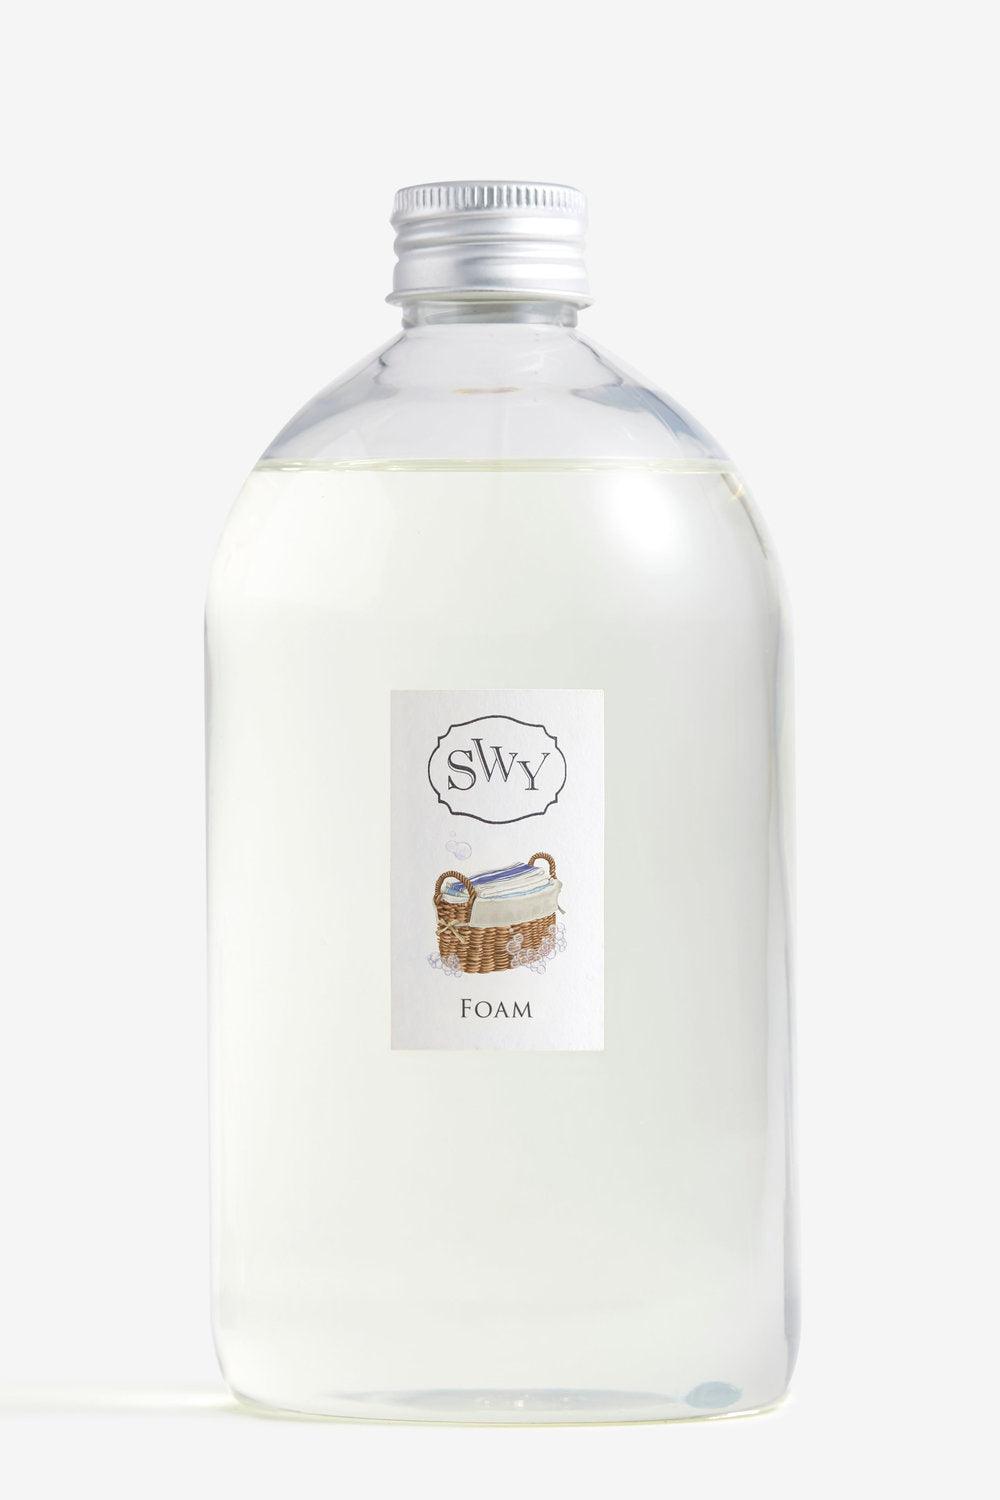 Reeds Diffuser – Foam - SWY - Scent With You